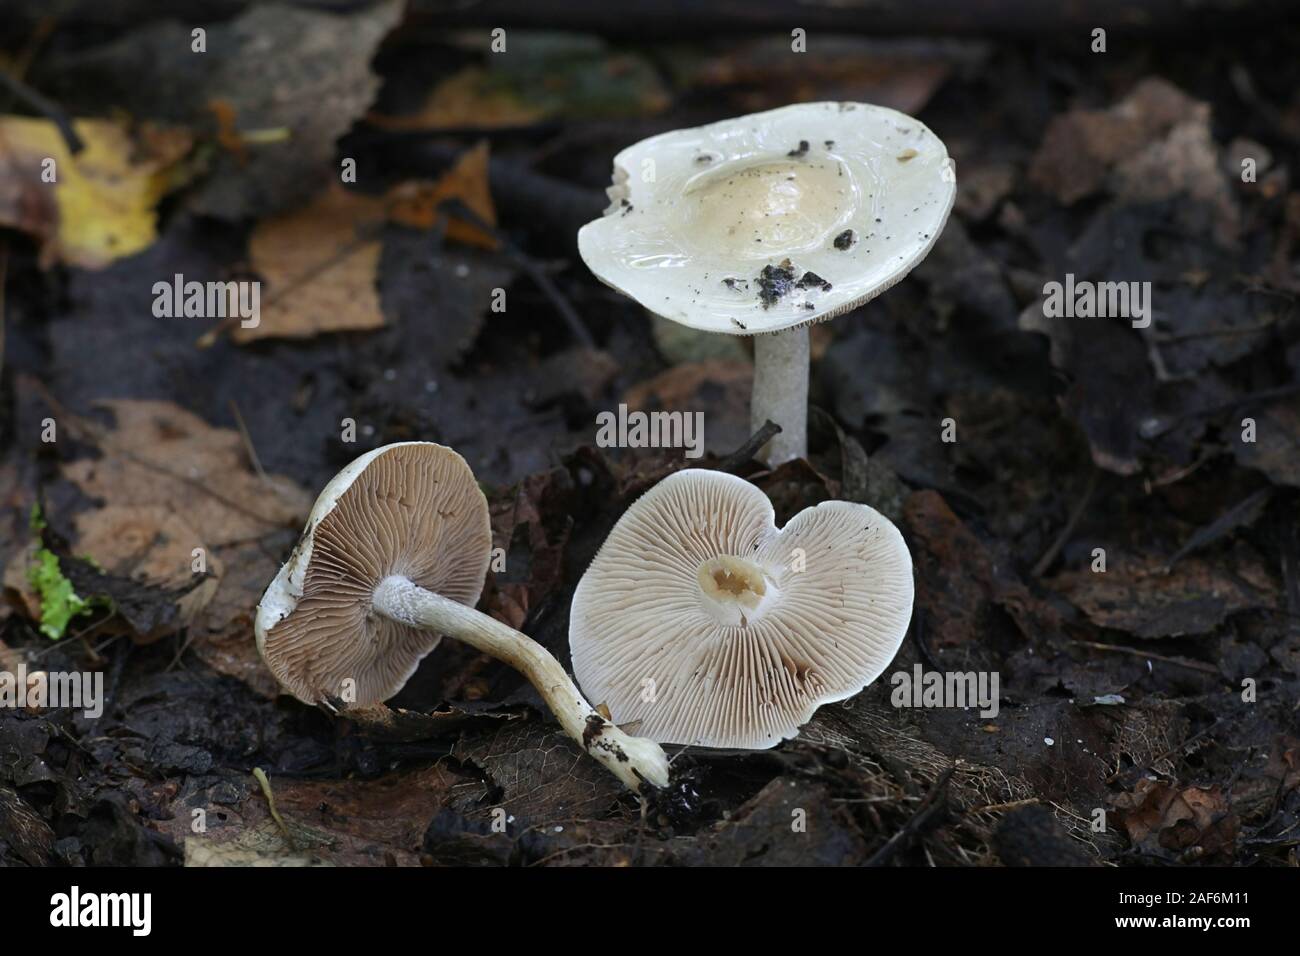 Hebeloma crustuliniforme, known as poison pie or fairy cakes, poisonous mushrooms from Finland Stock Photo